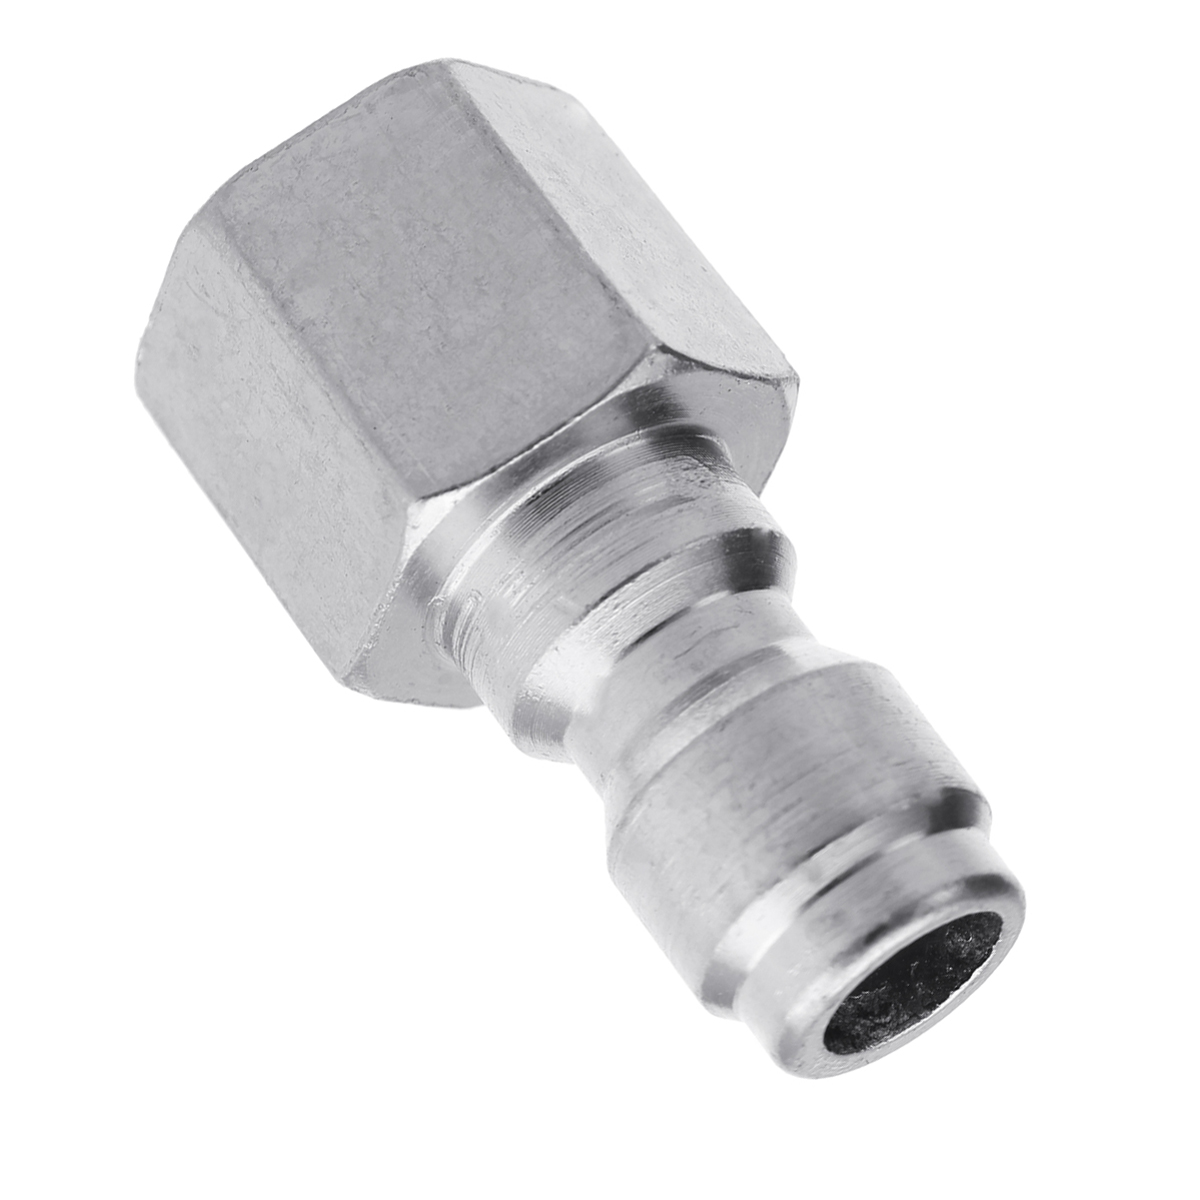 14-Inch-F-Quick-Release-Adapter-Connector-for-Pressure-Washer-Spray-Gun-1295973